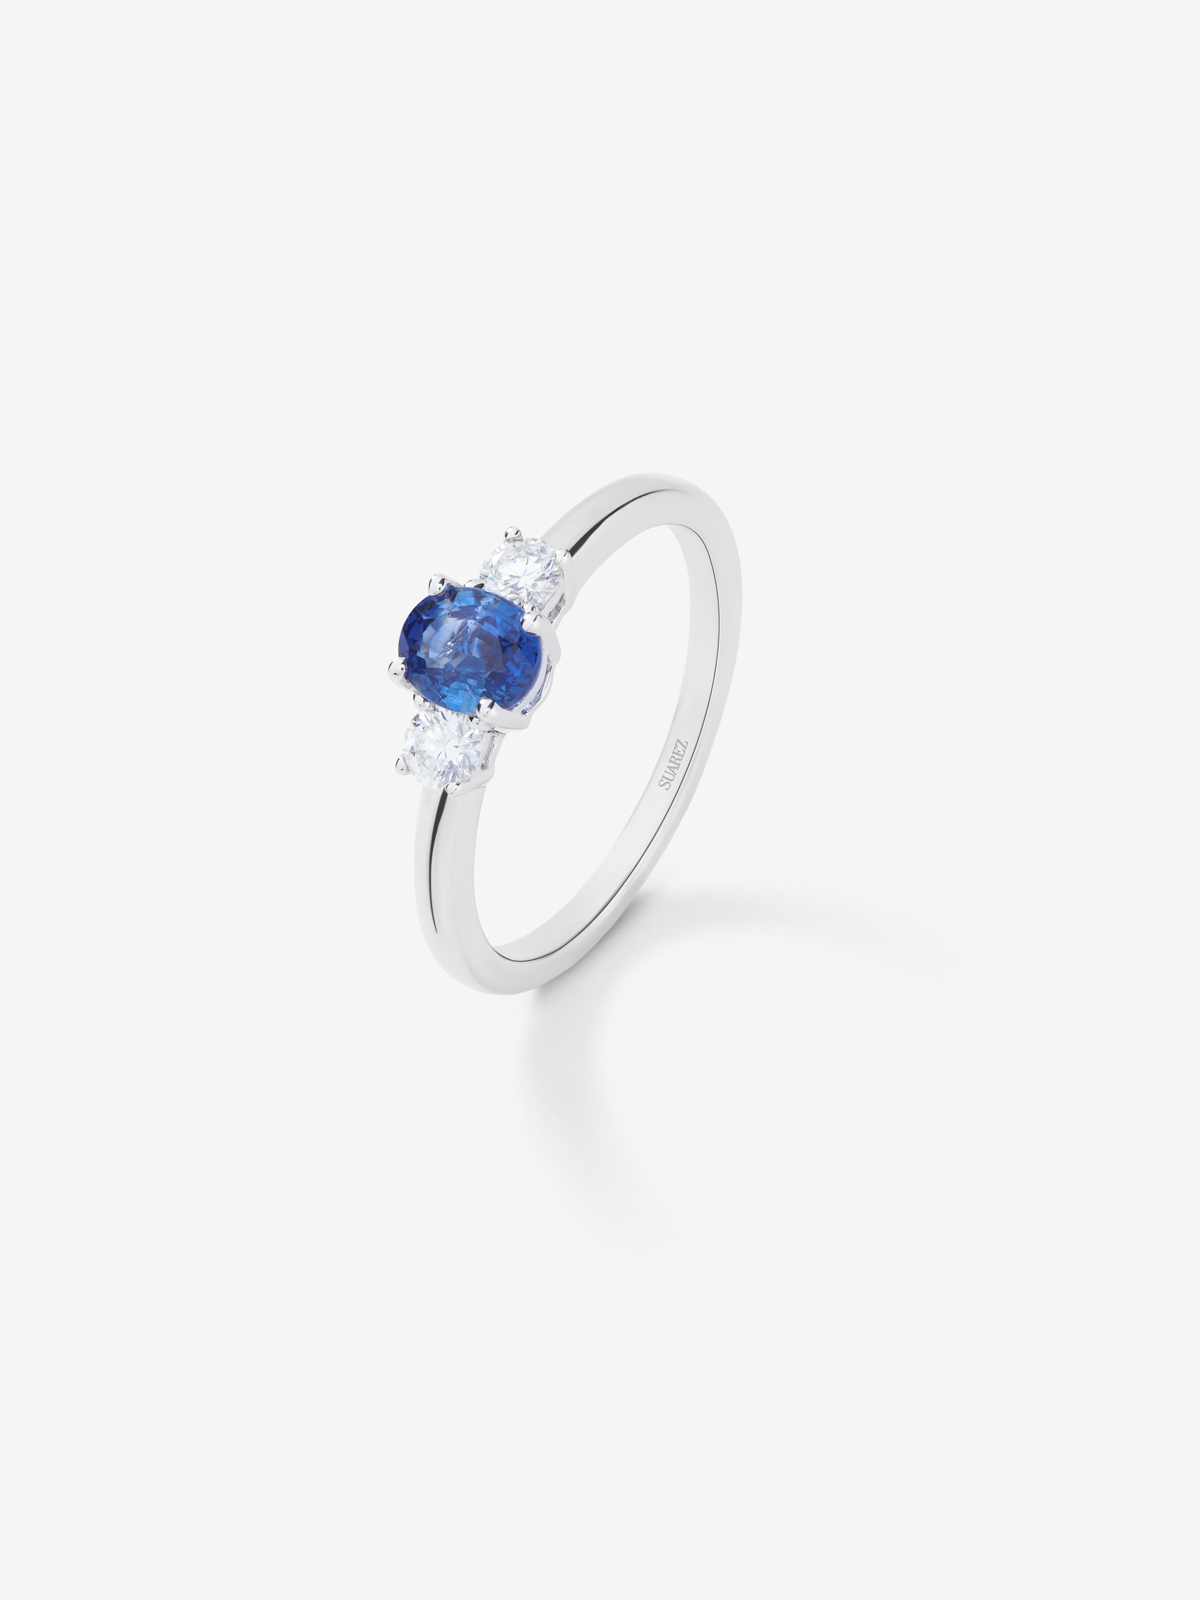 18K White Golden Tieillo Ring with Sapphire and Diamond